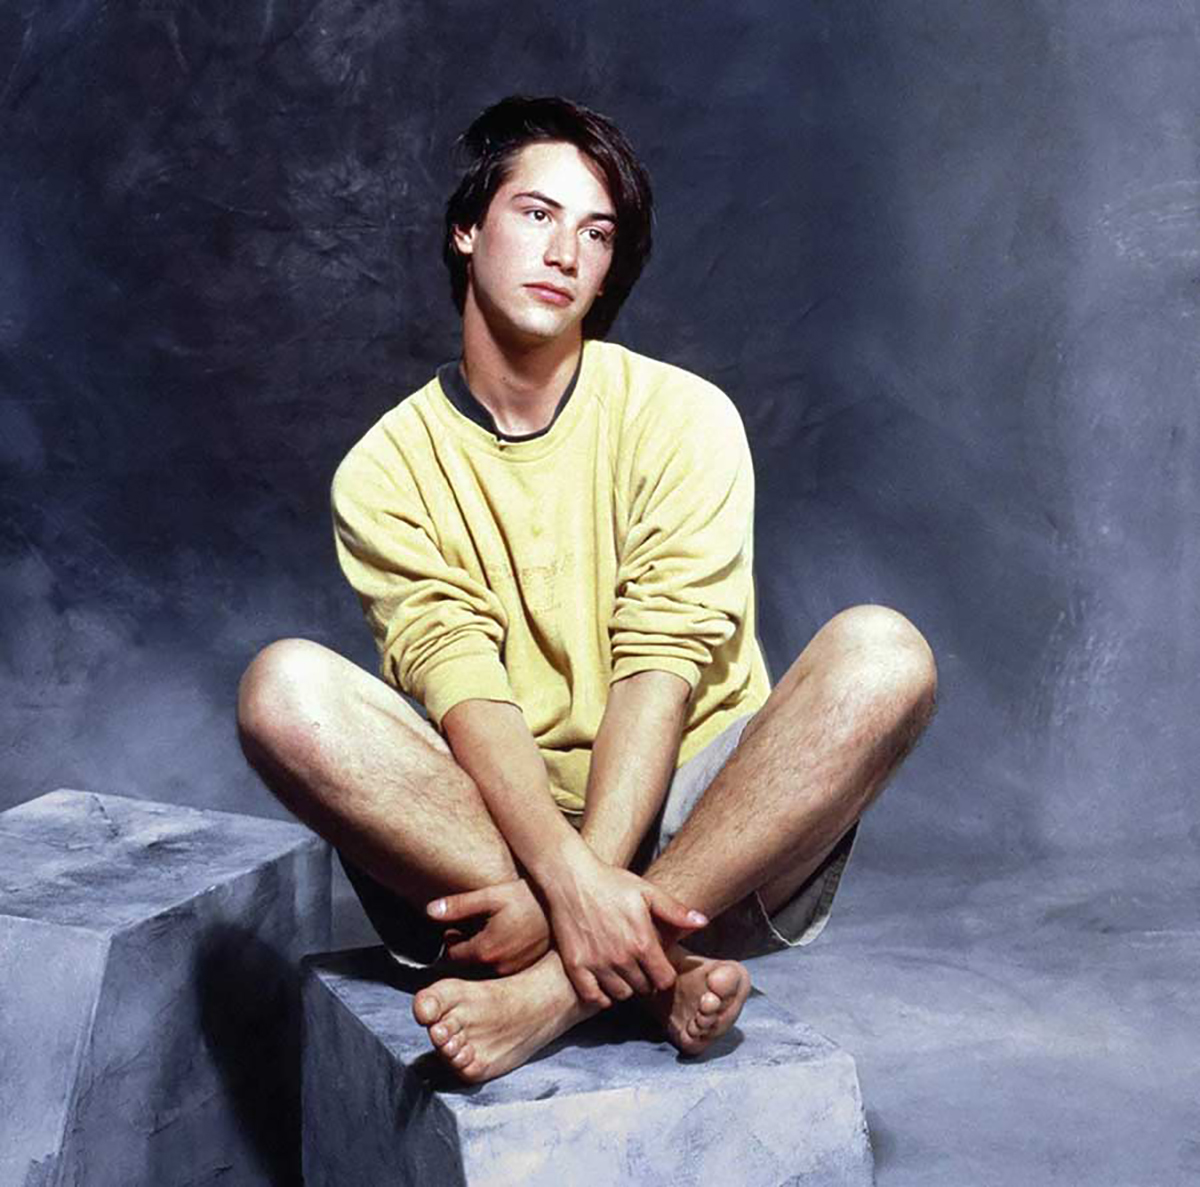 Keanu Reeves in a photo shoot in the early 1990s.